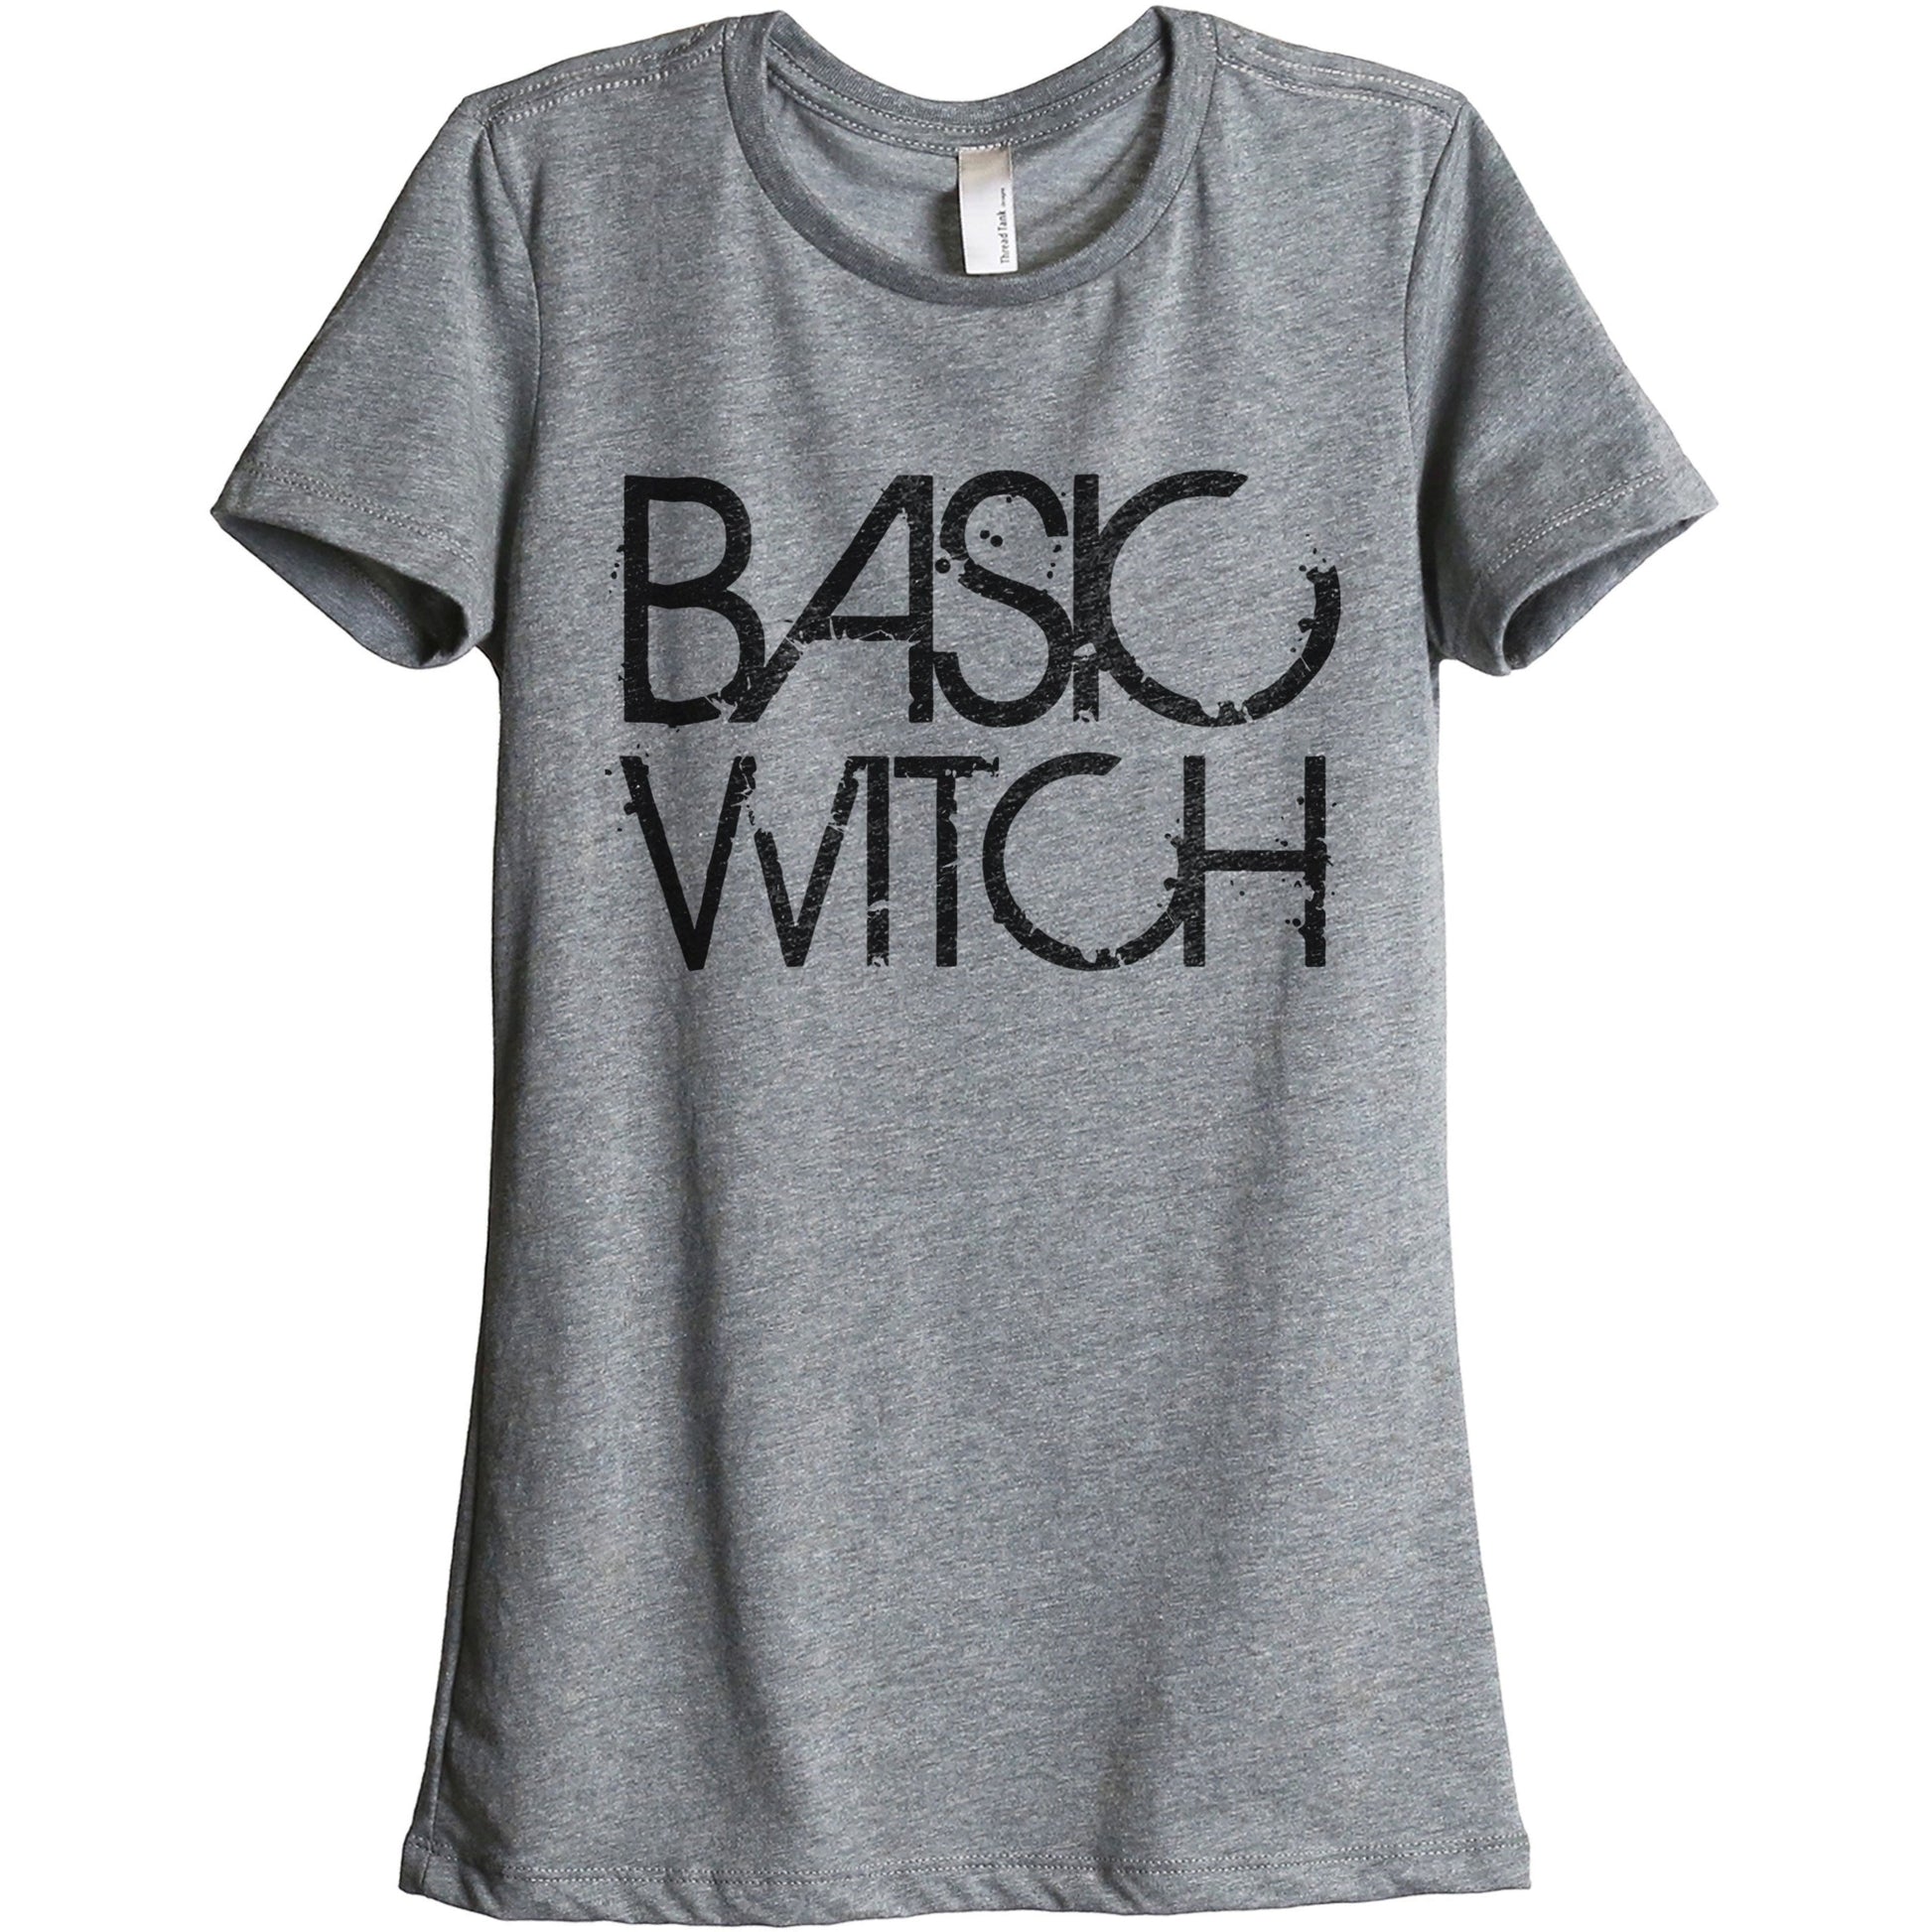 Basic Witch - Stories You Can Wear